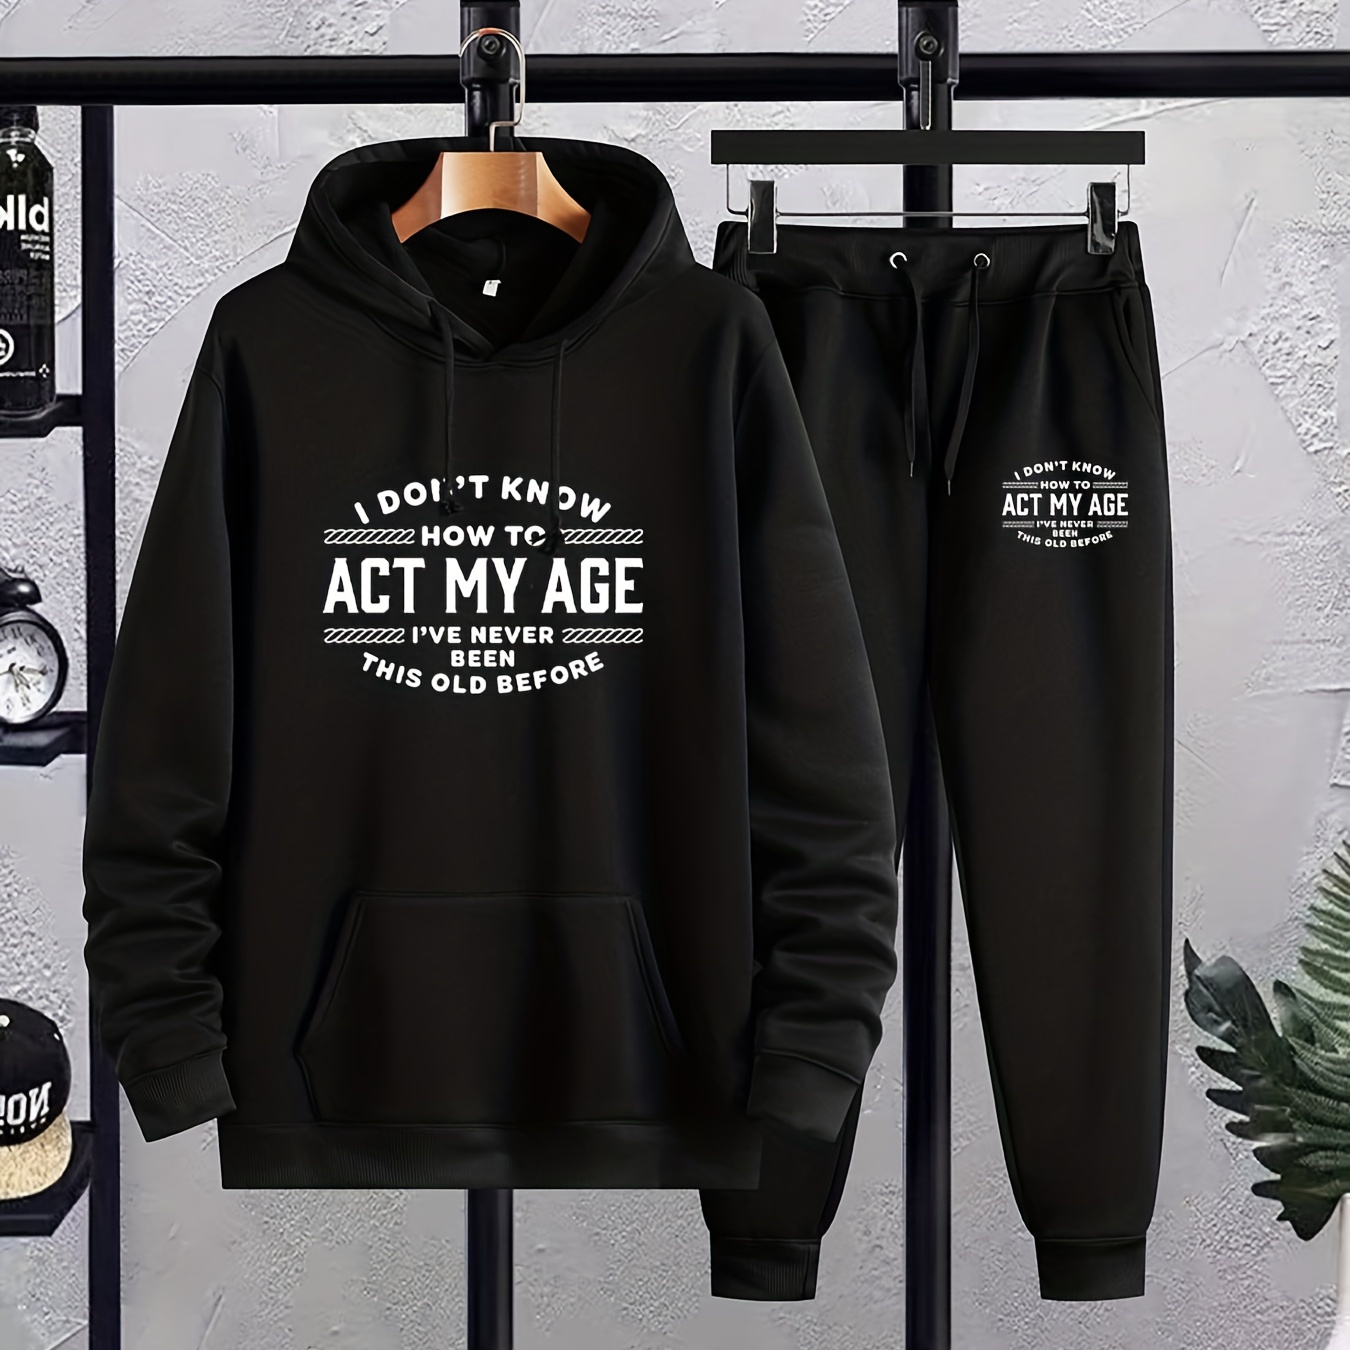 

Funny Slogan Print, Men's 2pcs Outfits, Casual Hoodies Long Sleeve Pullover Hooded Sweatshirt And Sweatpants Joggers Set For Spring Fall, Men's Clothing